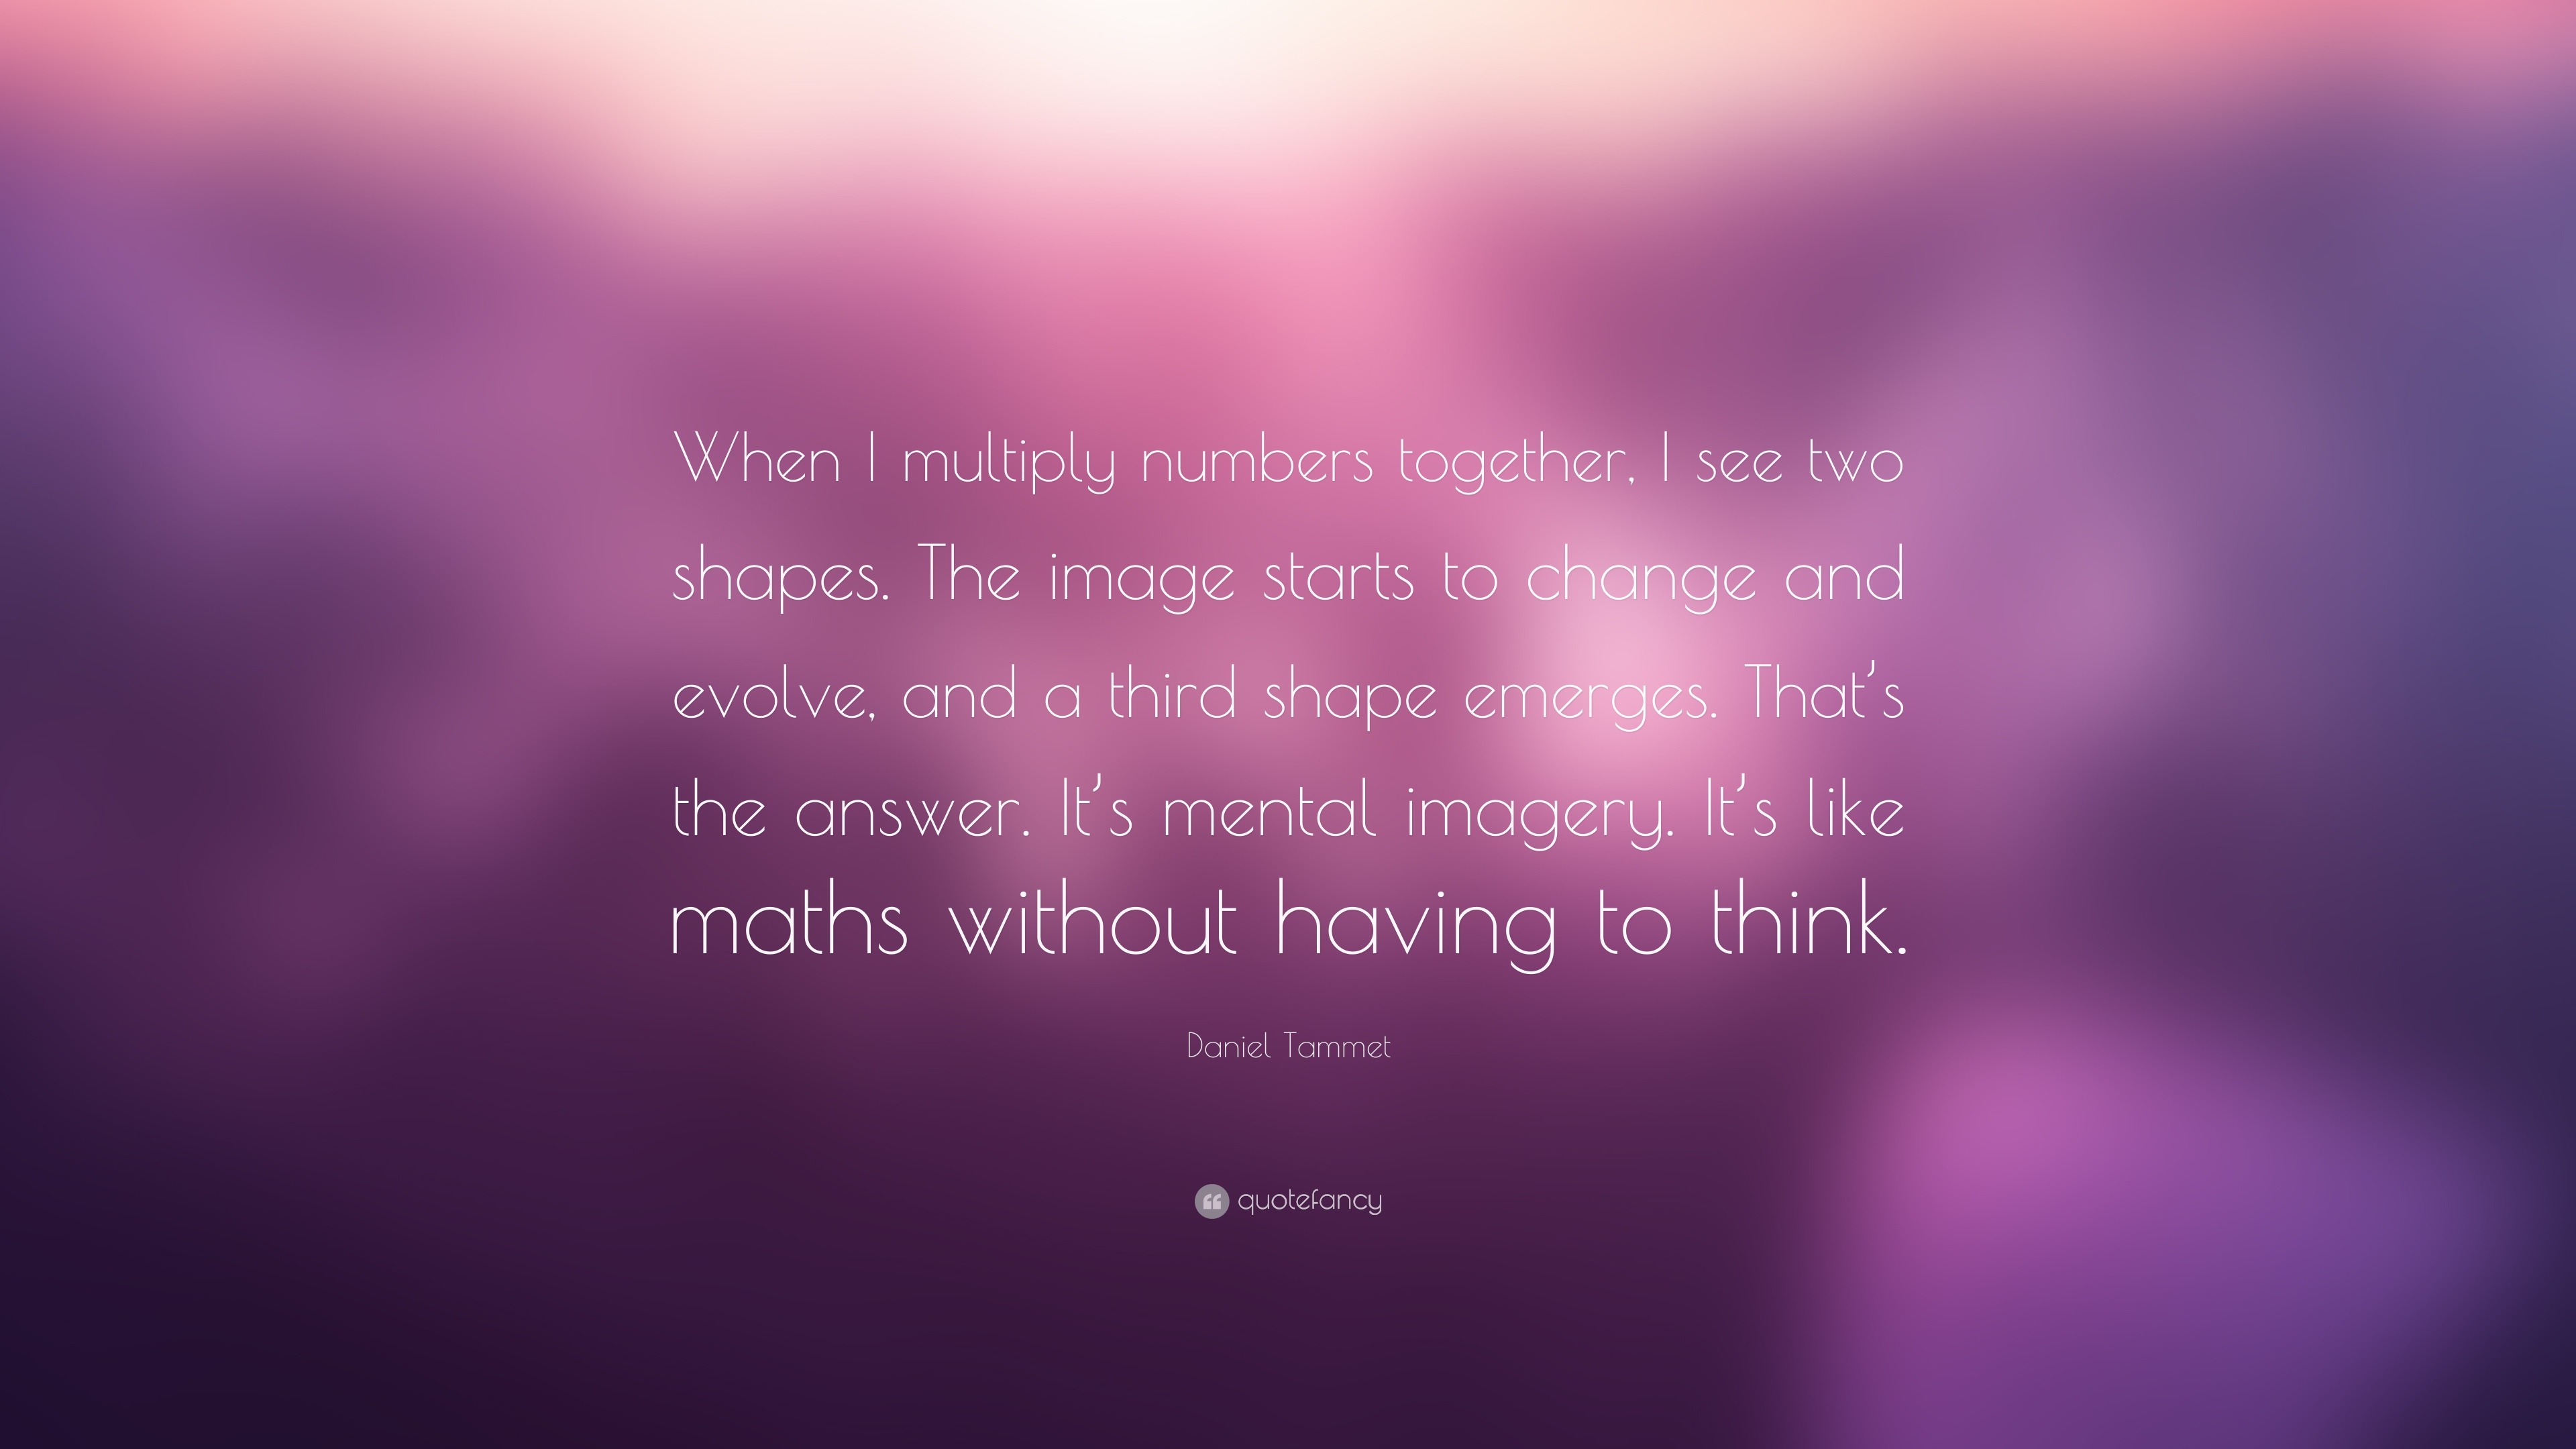 Daniel Tammet Quote: “When I multiply numbers together, I see two shapes.  The image starts to change and evolve, and a third shape emerges. Th...”